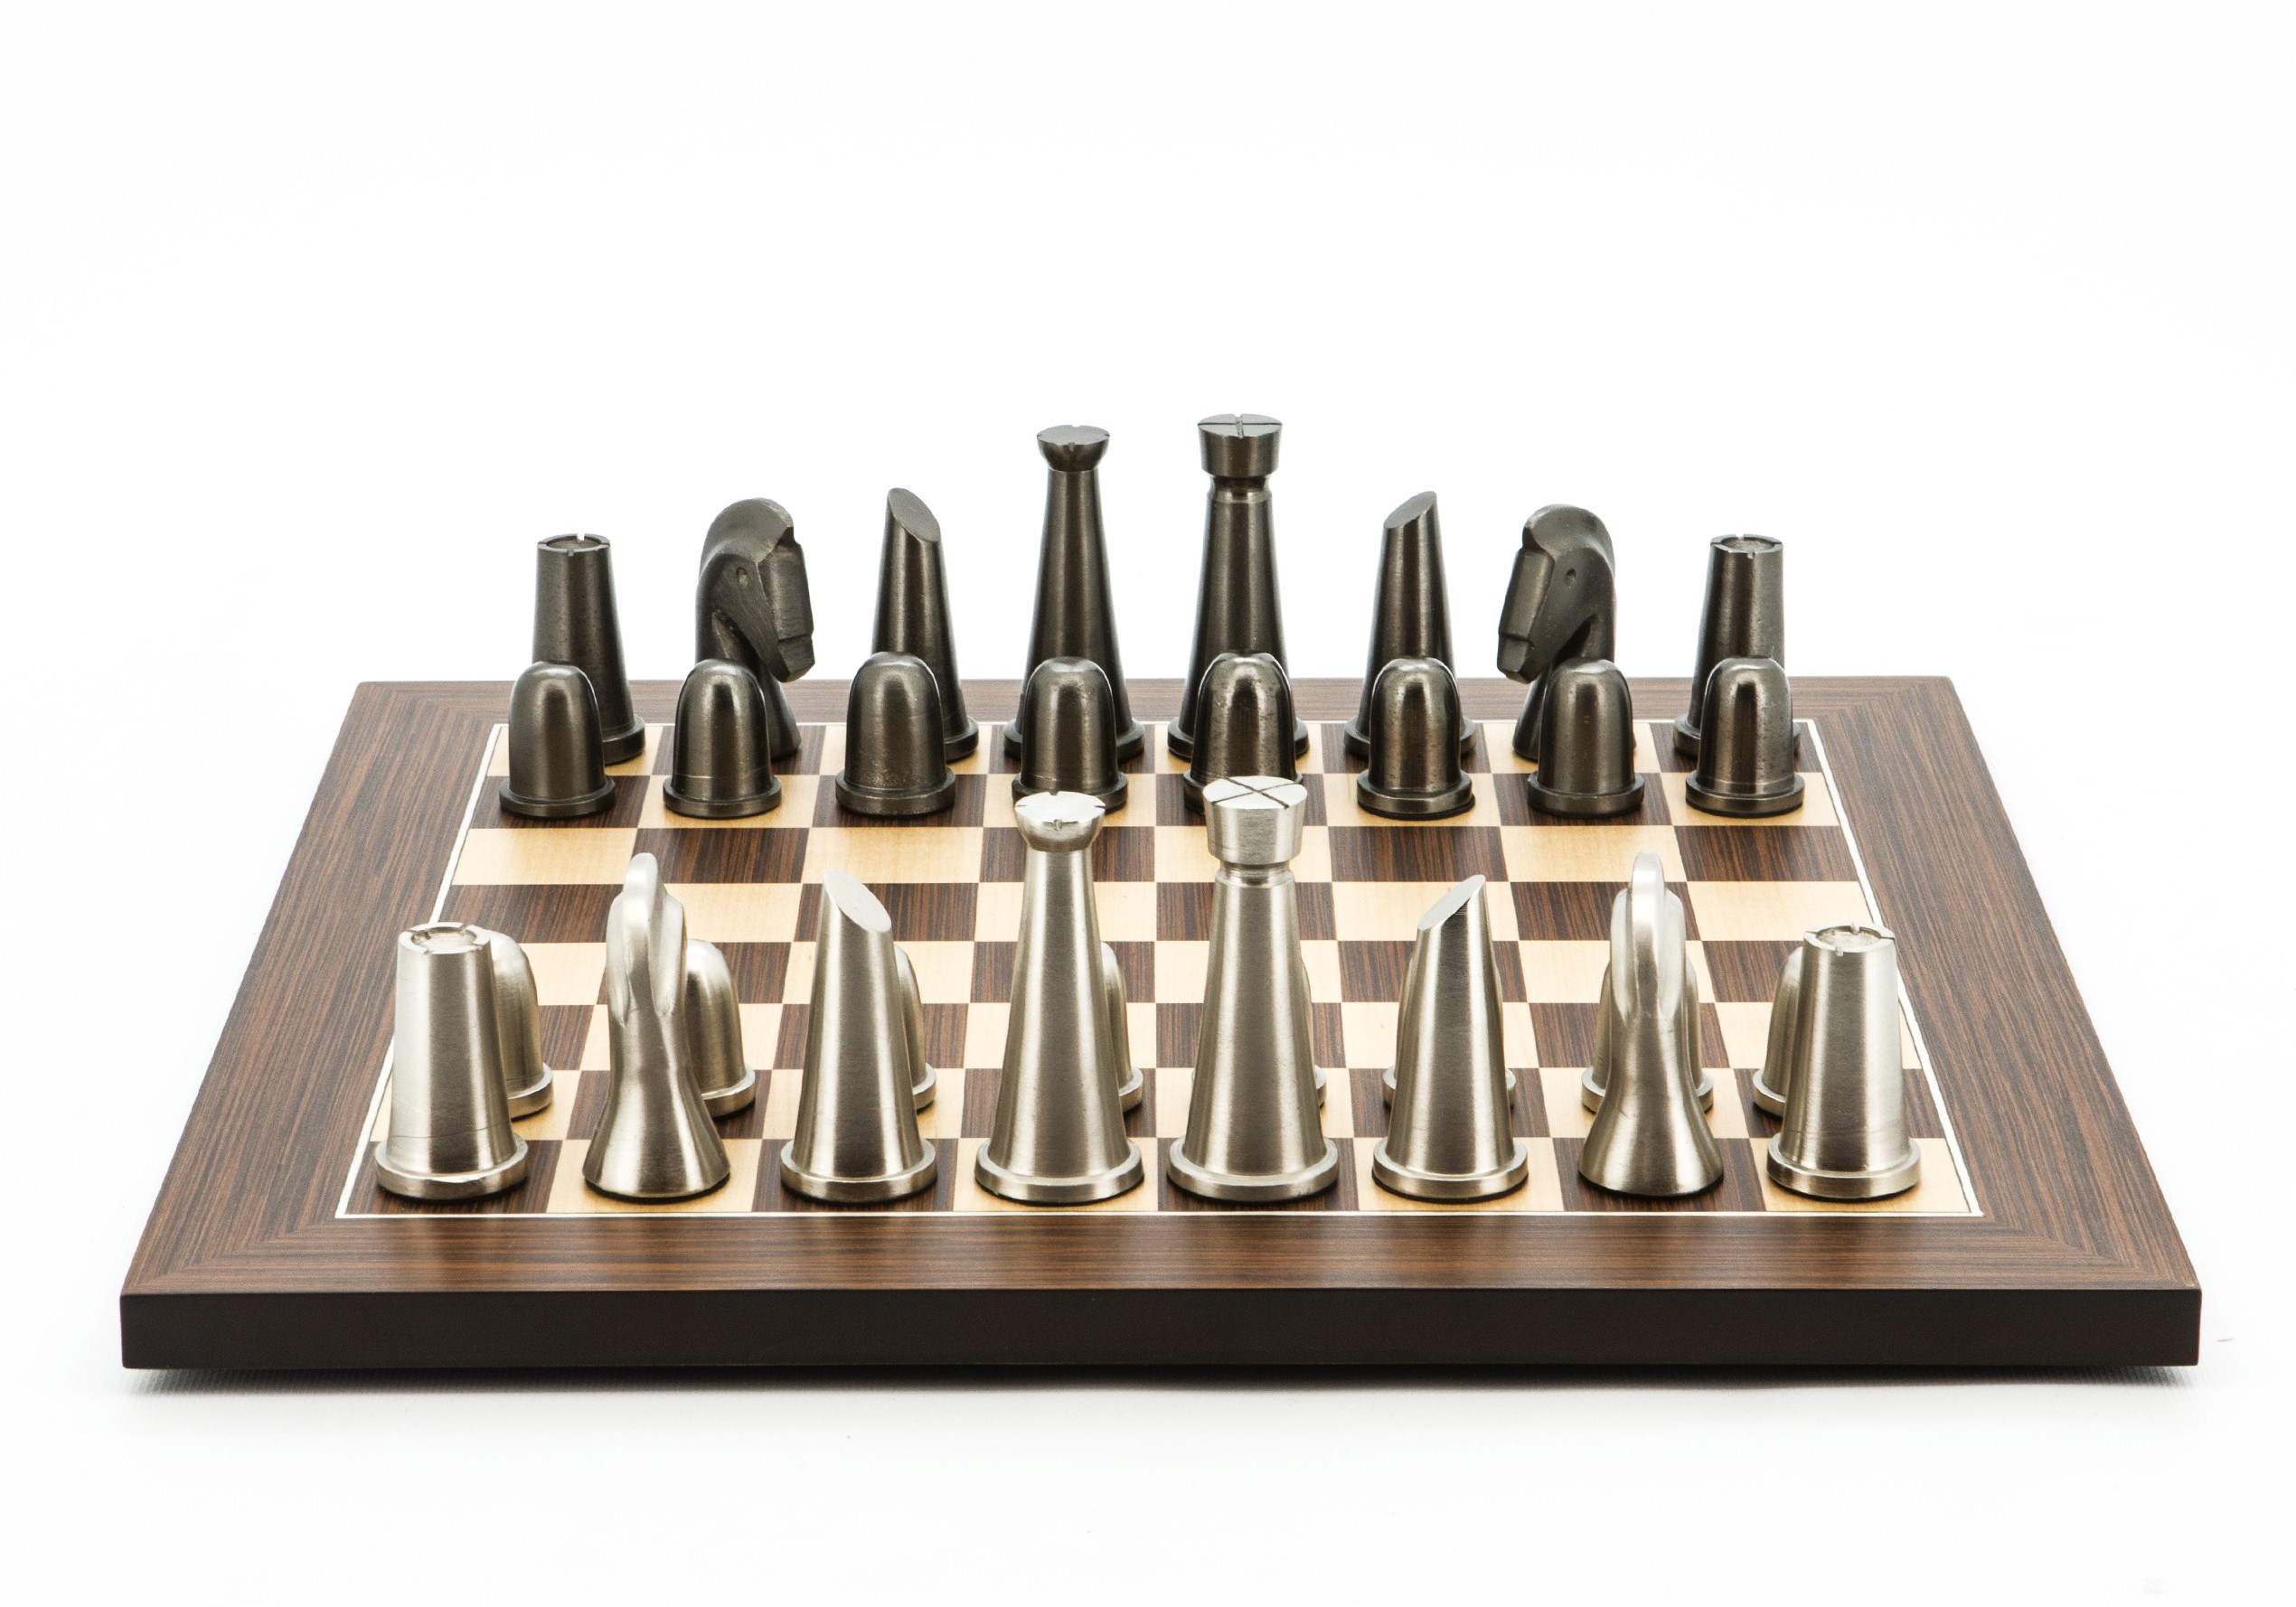 Dal Rossi Italy Chess Set Palisander / Maple Flat Board 40cm, With Metal Dark Titanium and Silver chessmen 85mm